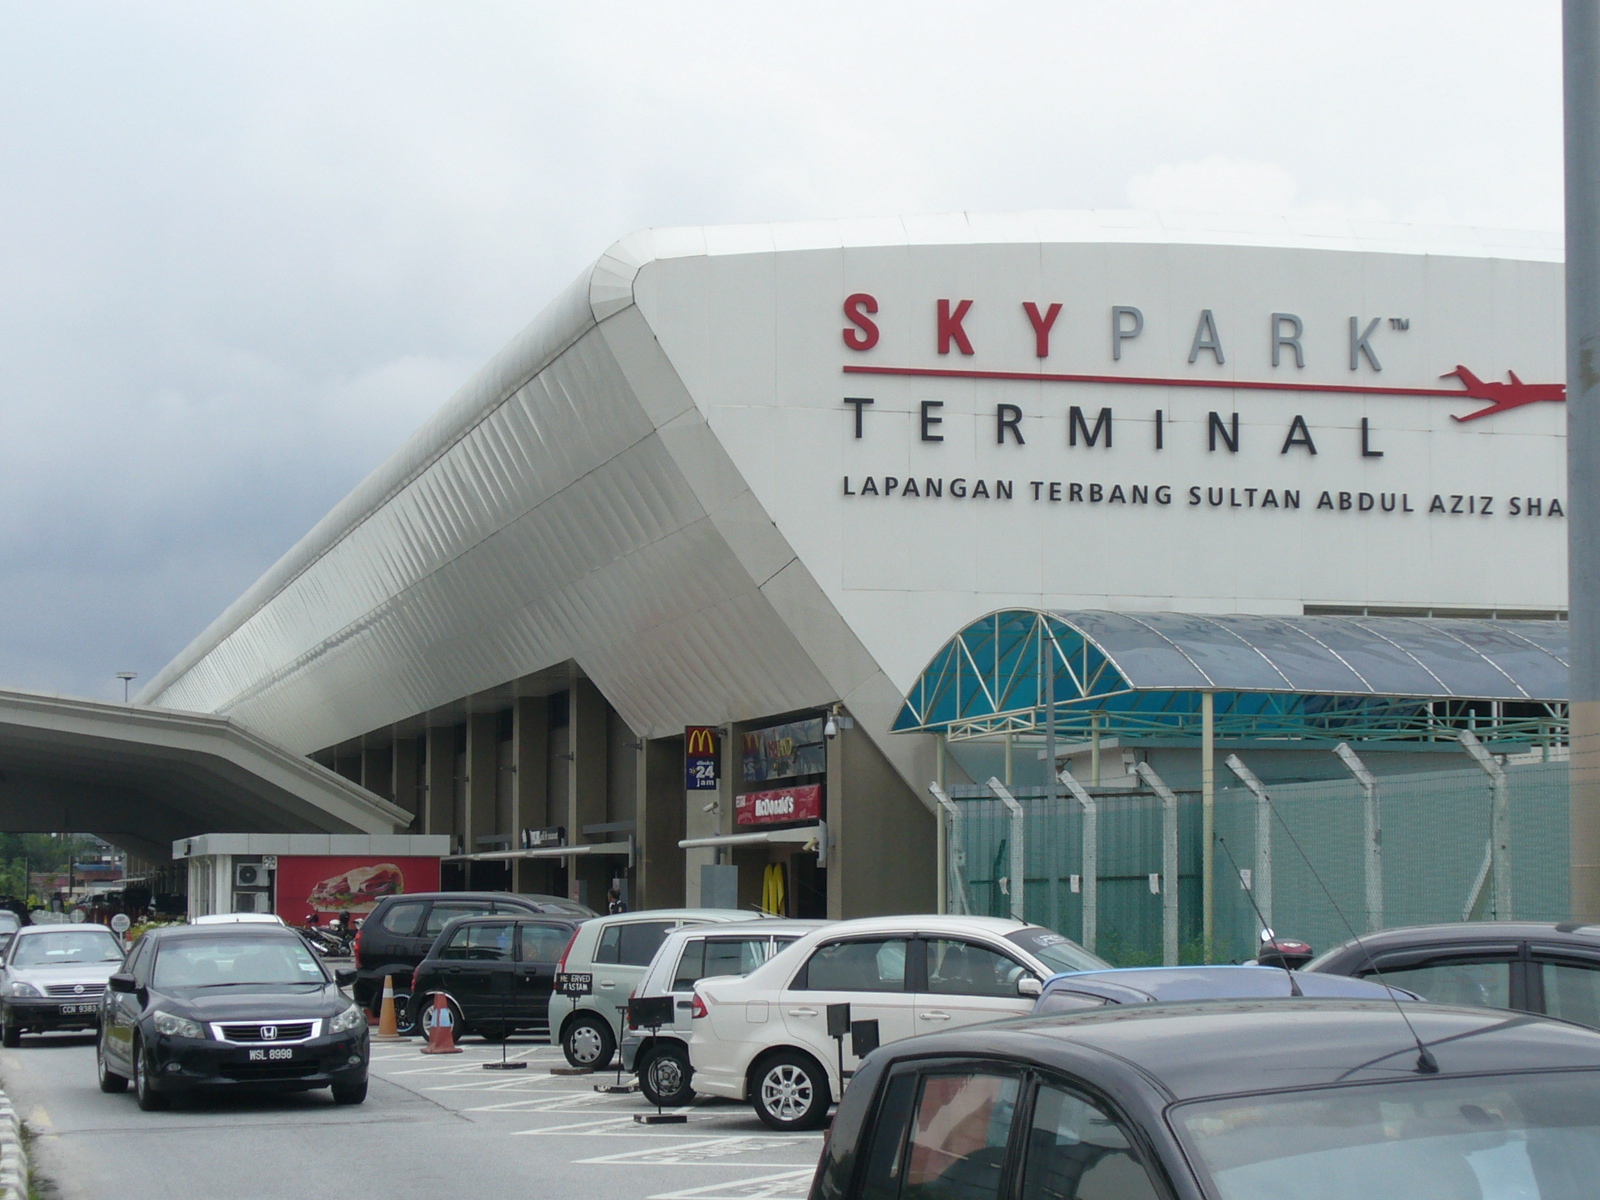 Subang, the old Kuala Lumpur International Airport now termed as a 'Sky Park' and base to a flying club along with a host of aviation related business's  linked mainly to aircraft servicing and maintenance.